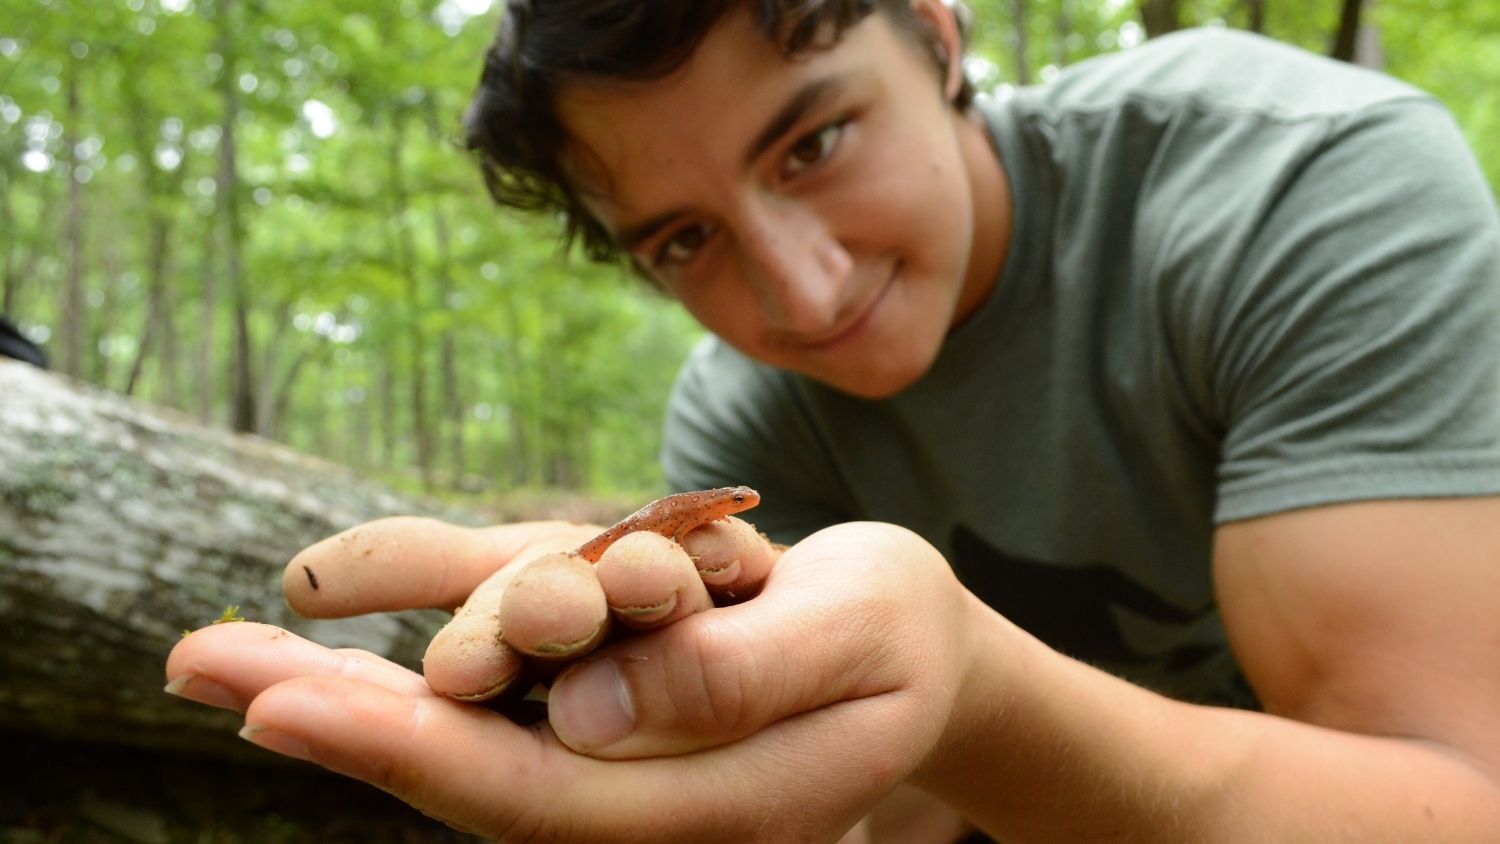 Ben Zino - Ben Zino is Promoting Wildlife Conservation One Video at a Time - College of Natural Resources News NC State University